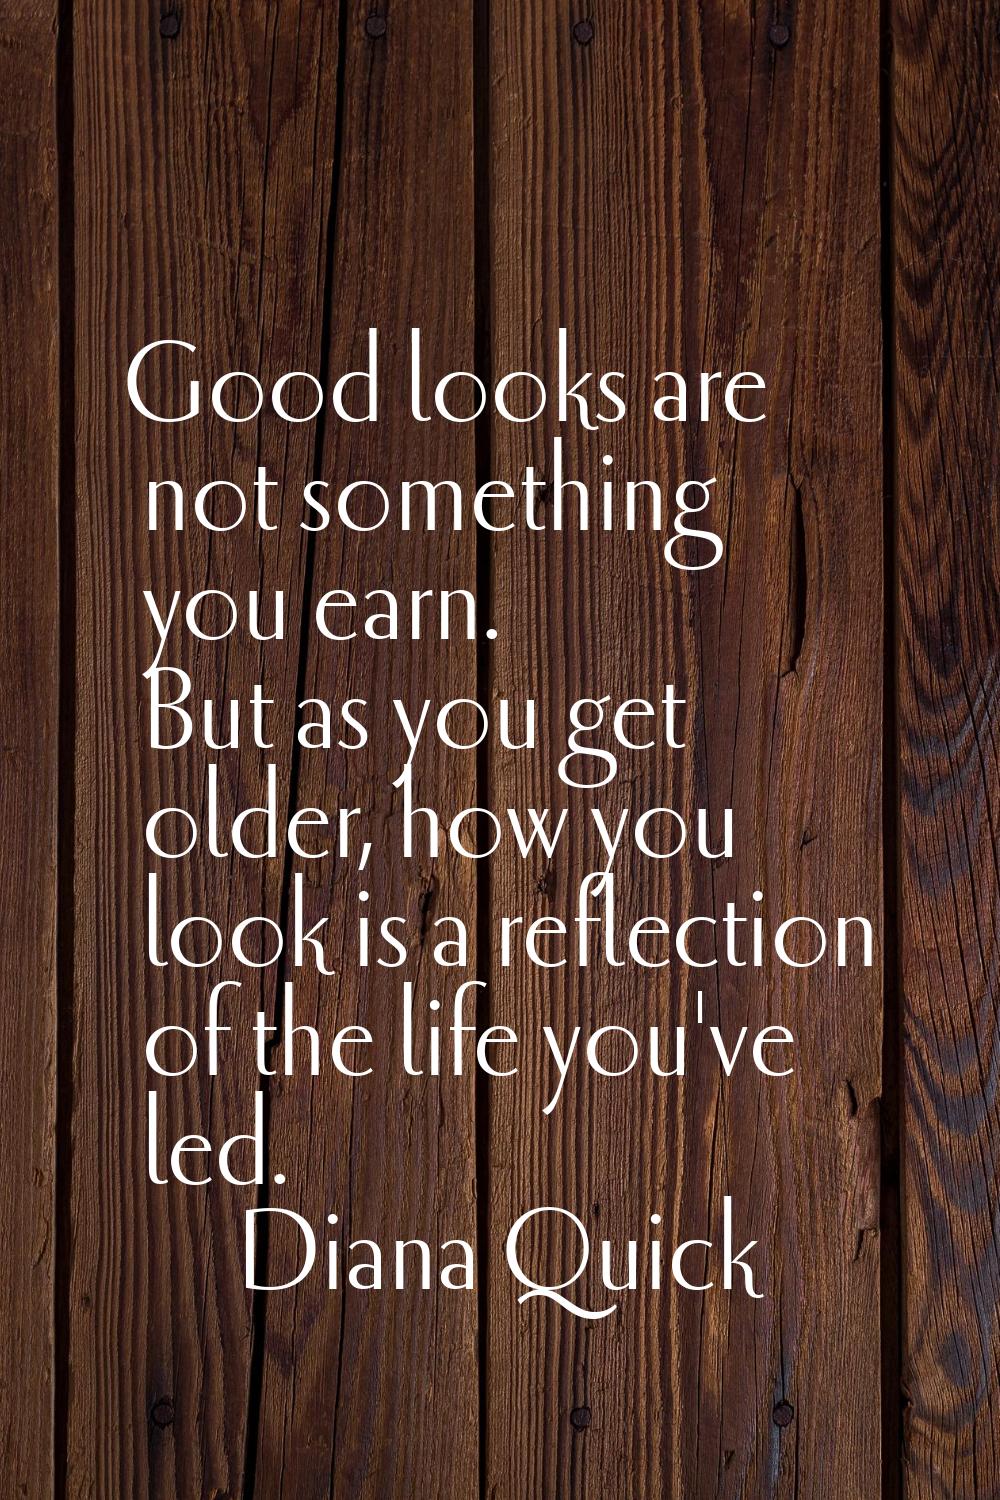 Good looks are not something you earn. But as you get older, how you look is a reflection of the li